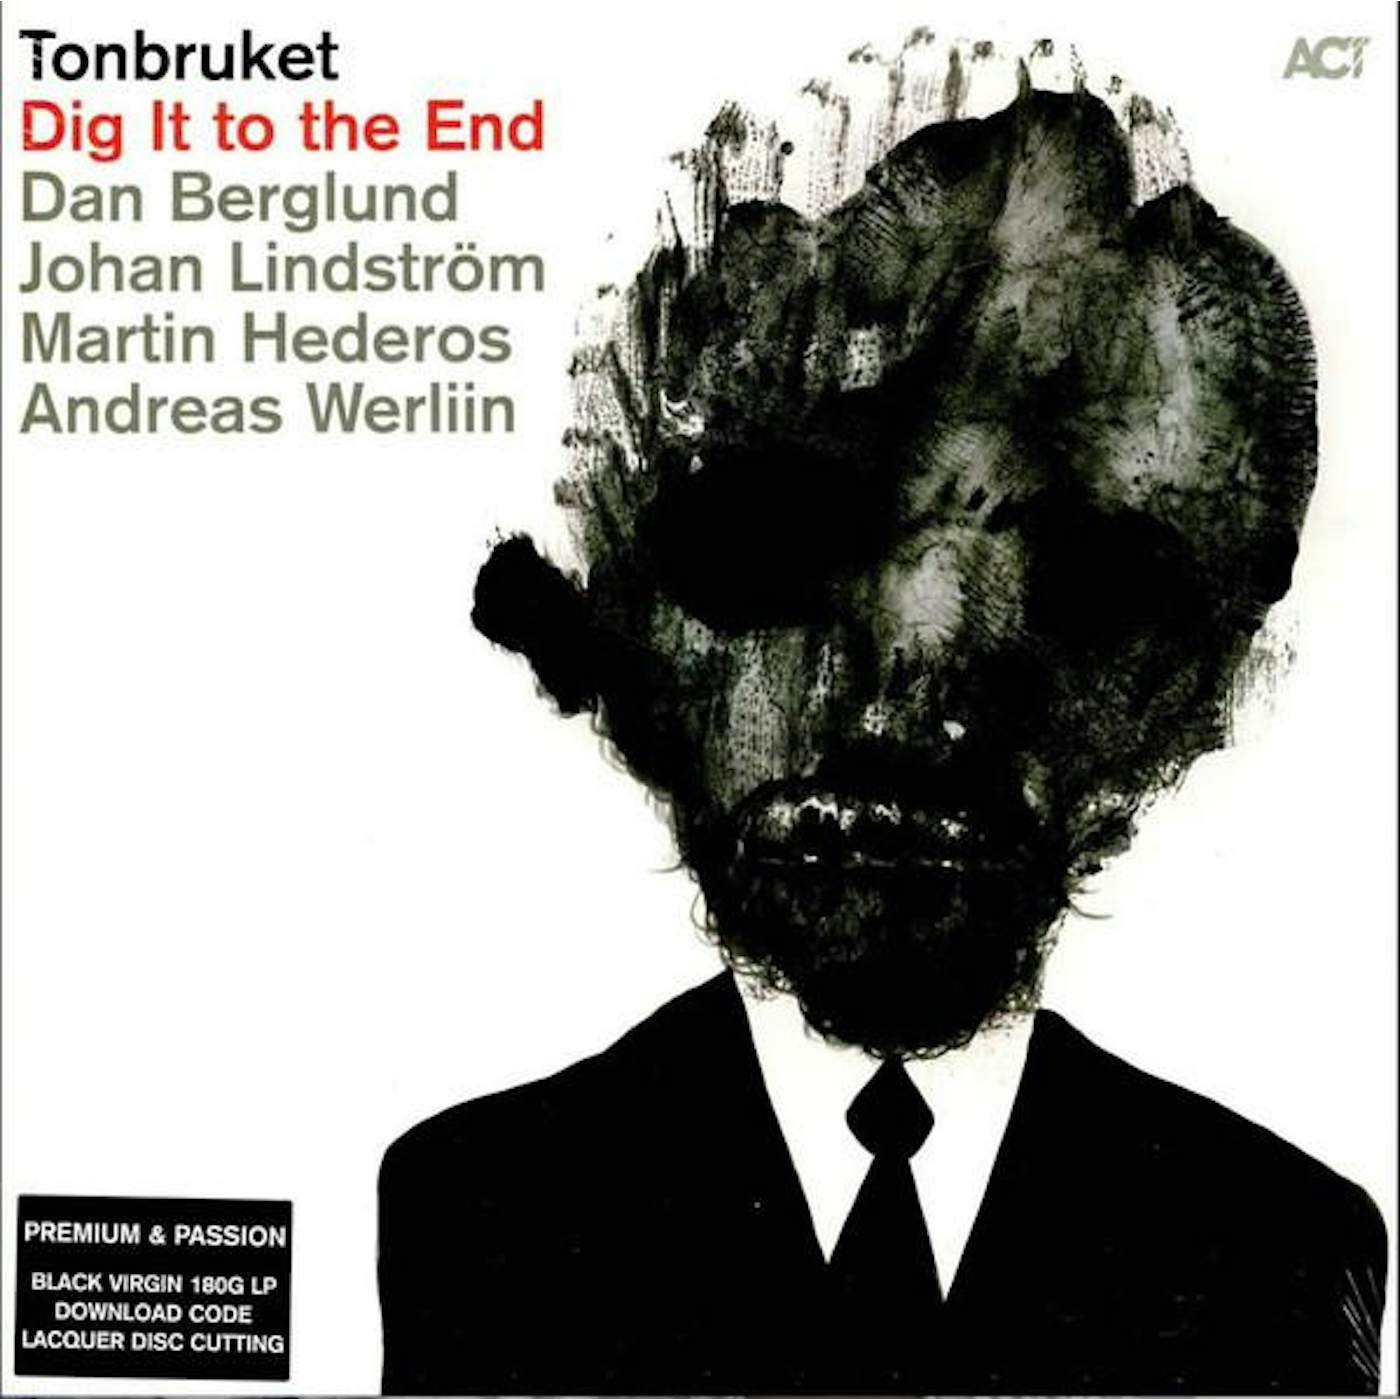 Tonbruket Dig It To The End Vinyl Record